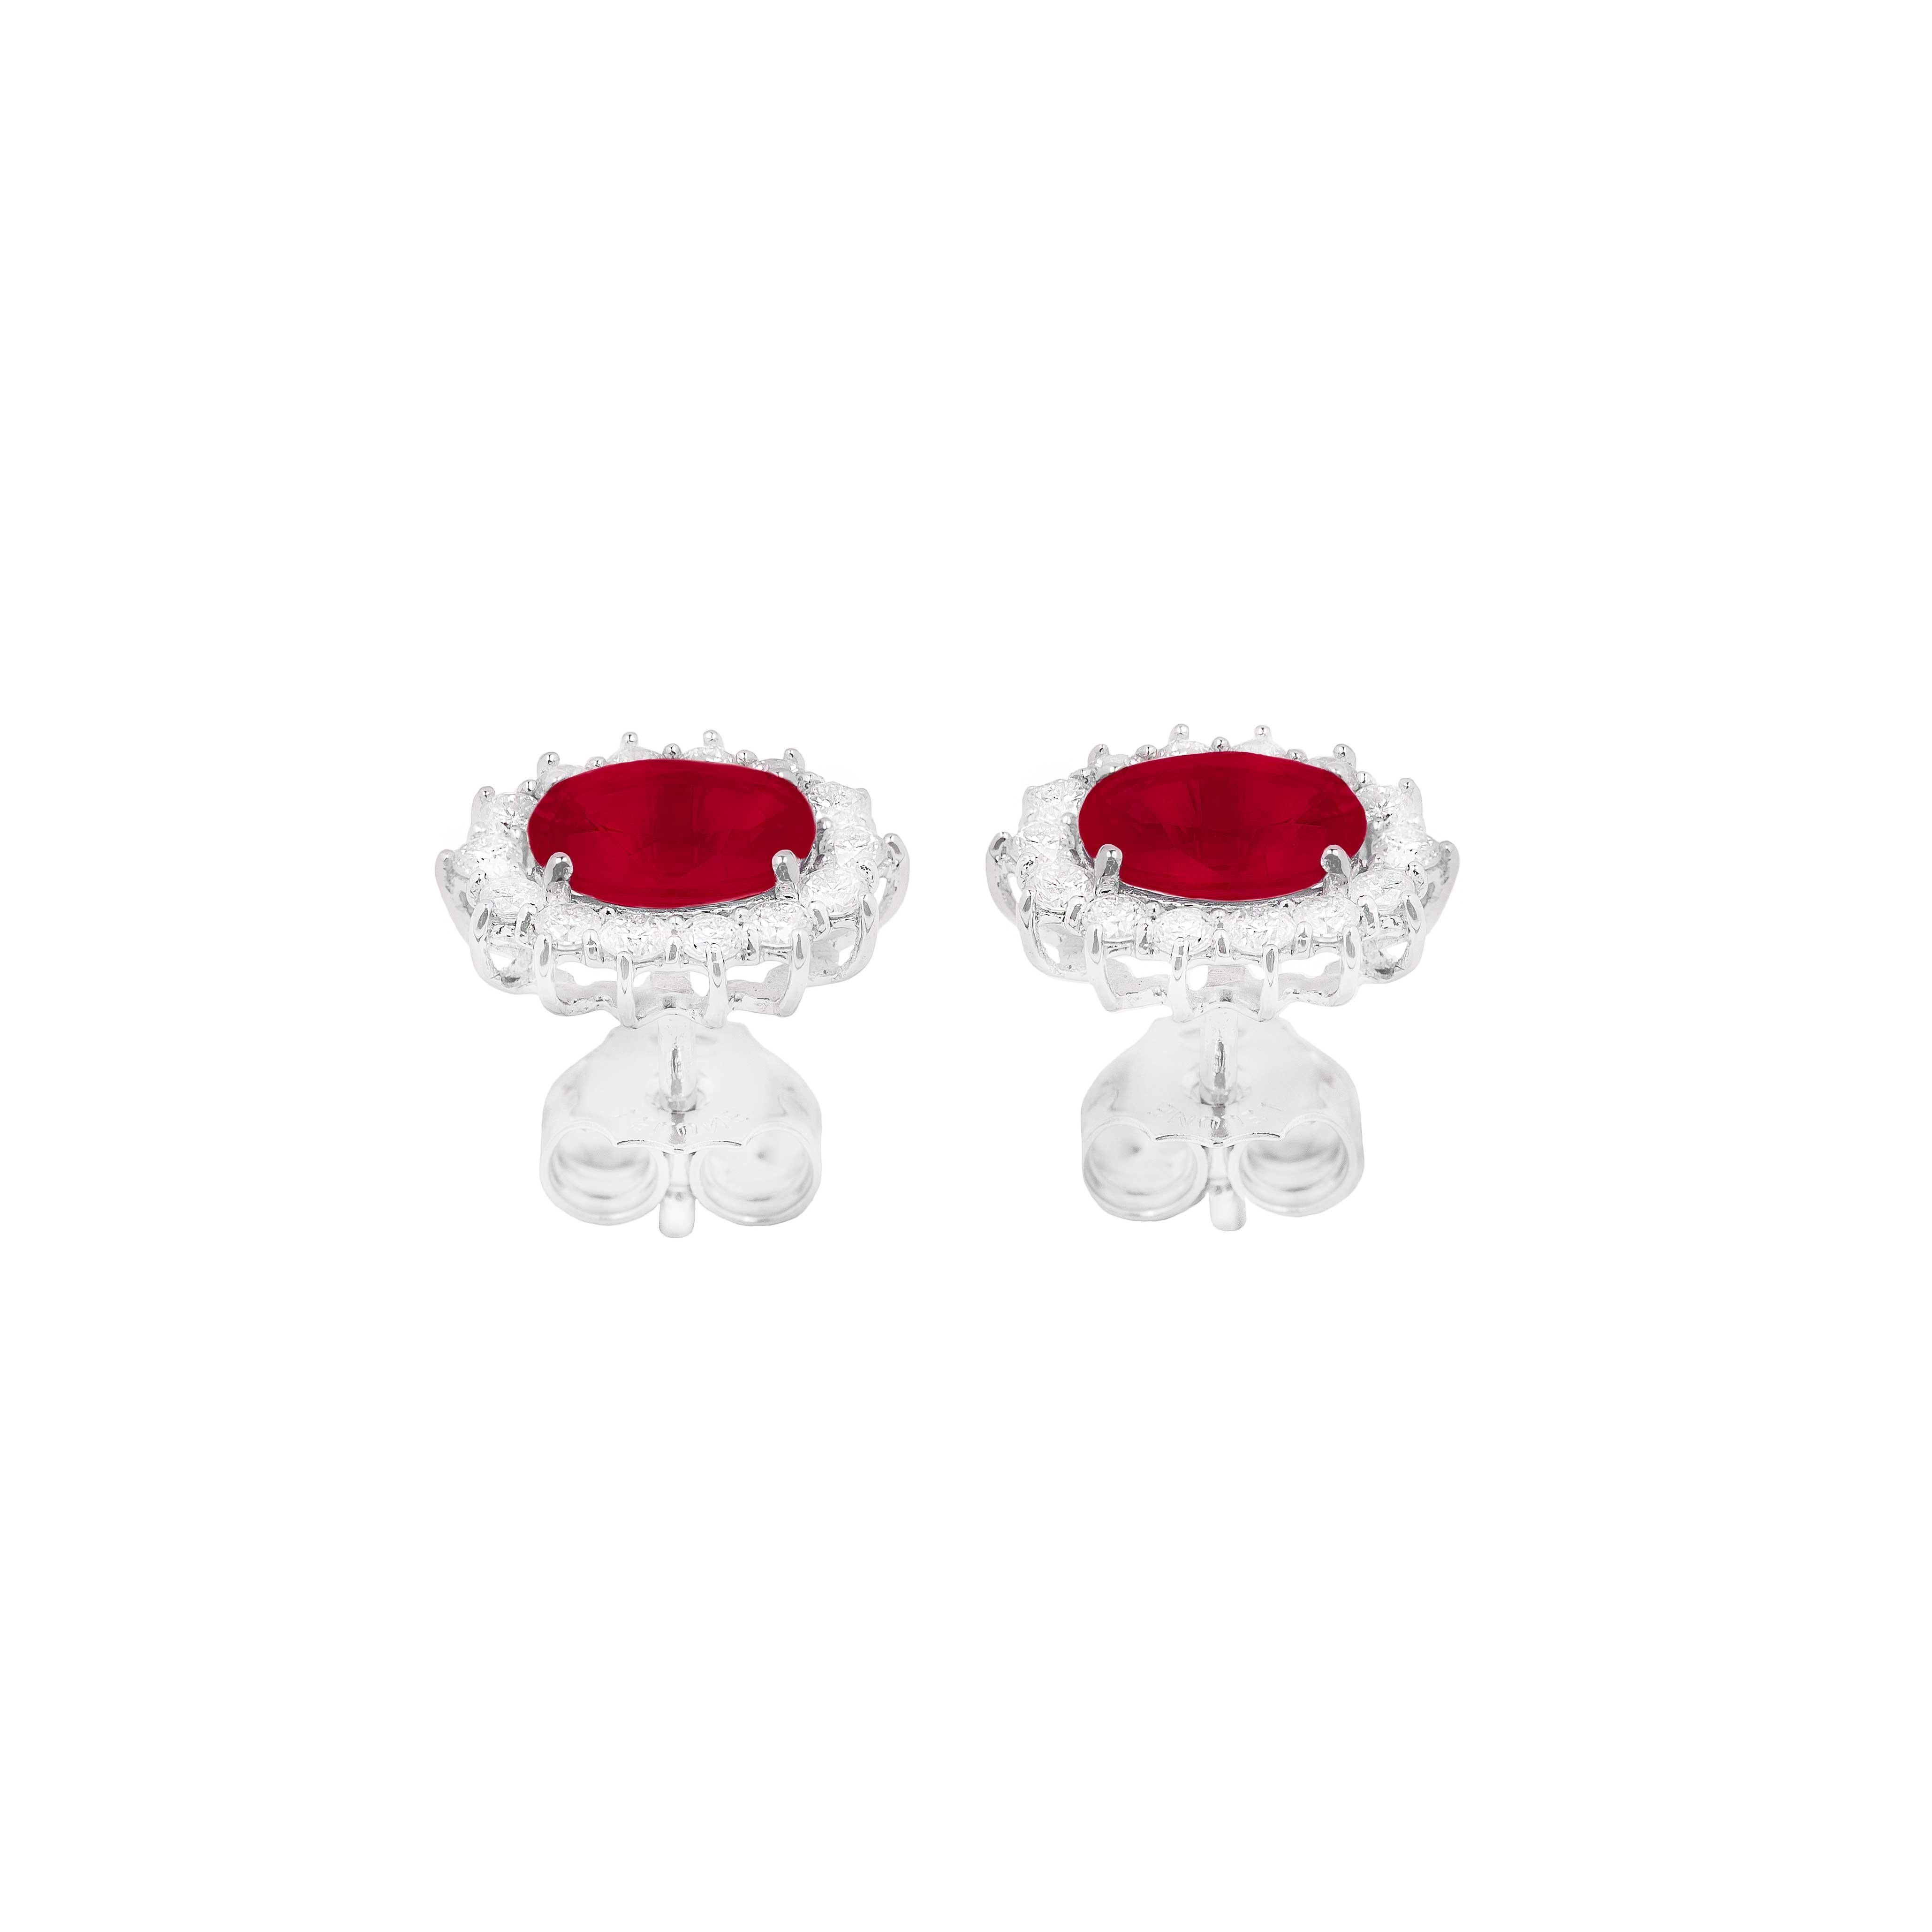 These bright 18K white gold earrings are made in Italy by LeLune.
They feature a stud closure and each earrings consist of one oval cut ruby red in the centre surrounded by a row of smaller brilliant cut white diamonds.

Rubies 1.16ct 
Diamonds